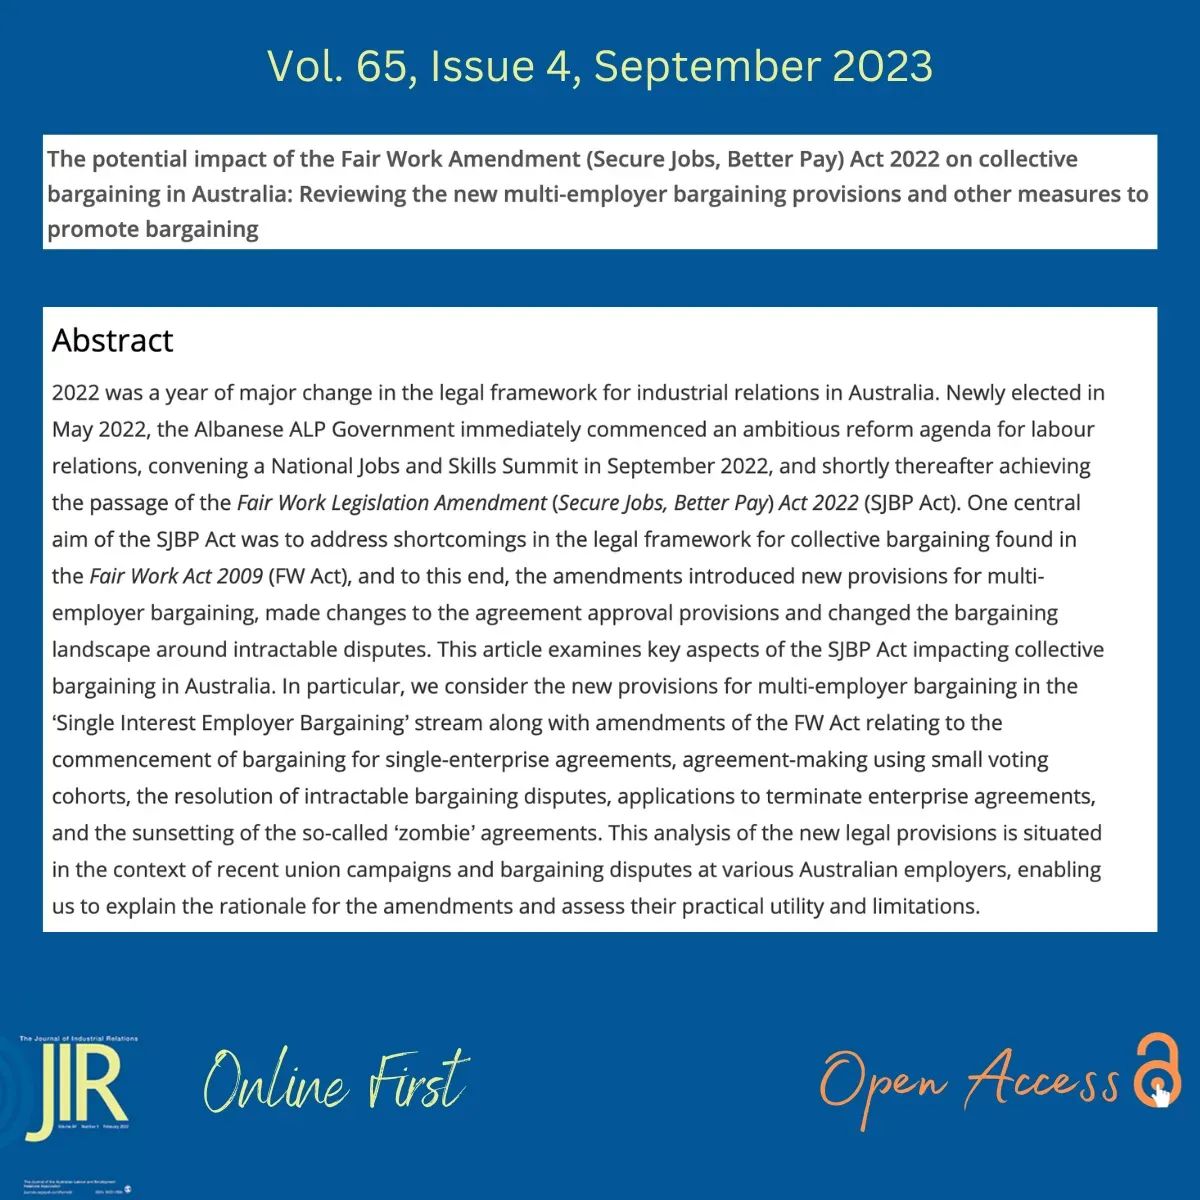 Shae McCrystal & @AnthonyForsyt10 's latest article examines the key aspects of the #FairWork SJBP Amendments Act and the impact it has had on the legal framework for #collectivebargaining in Australia #OpenAccess doi.org/10.1177/002218… @RMIT @SydneyLawSchool